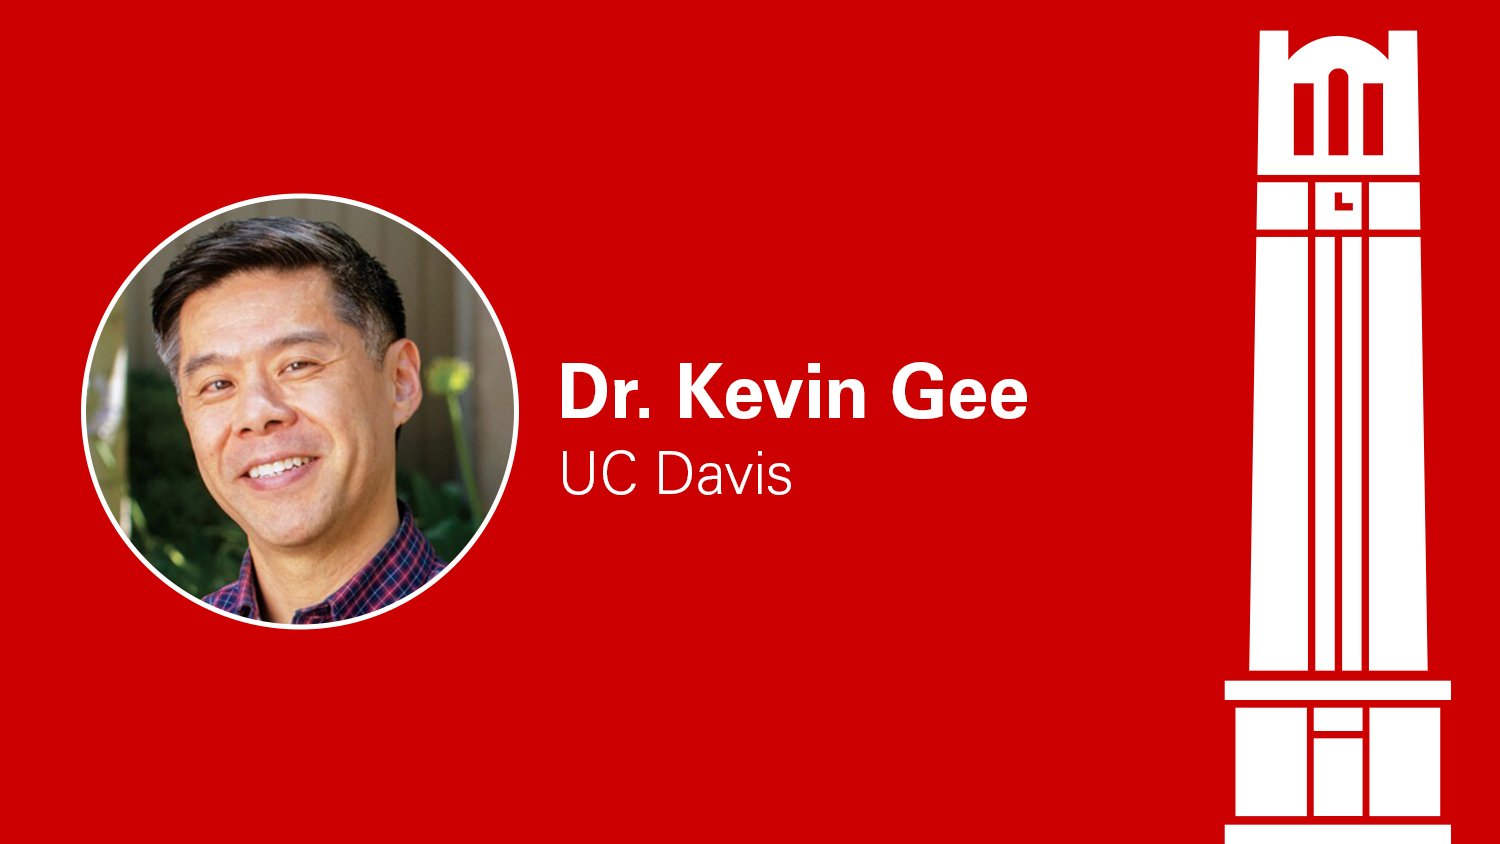 Kevin Gee